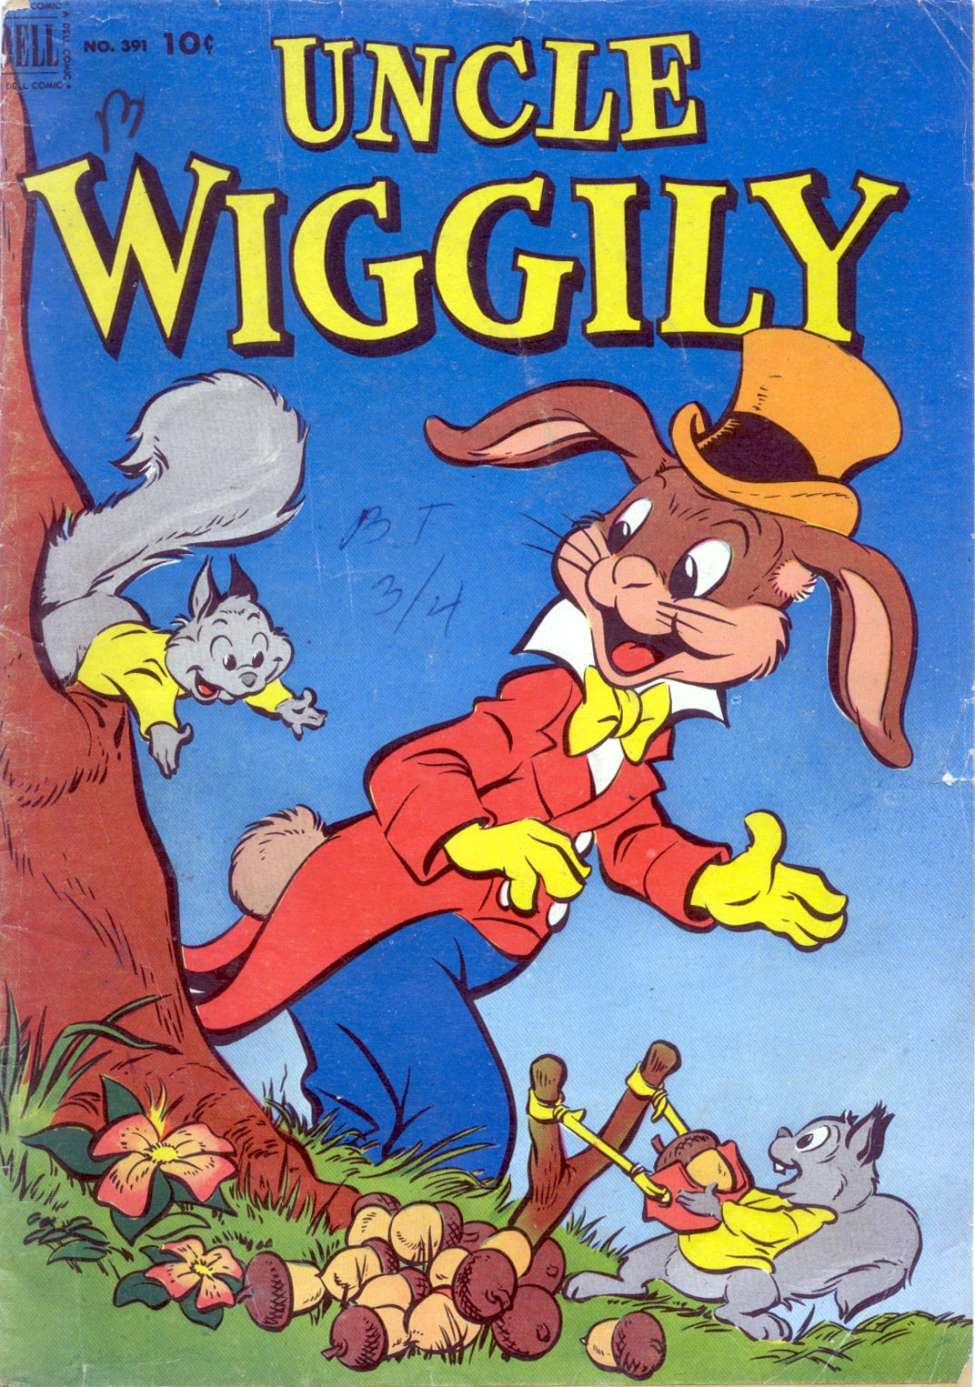 Book Cover For 0391 - Uncle Wiggily